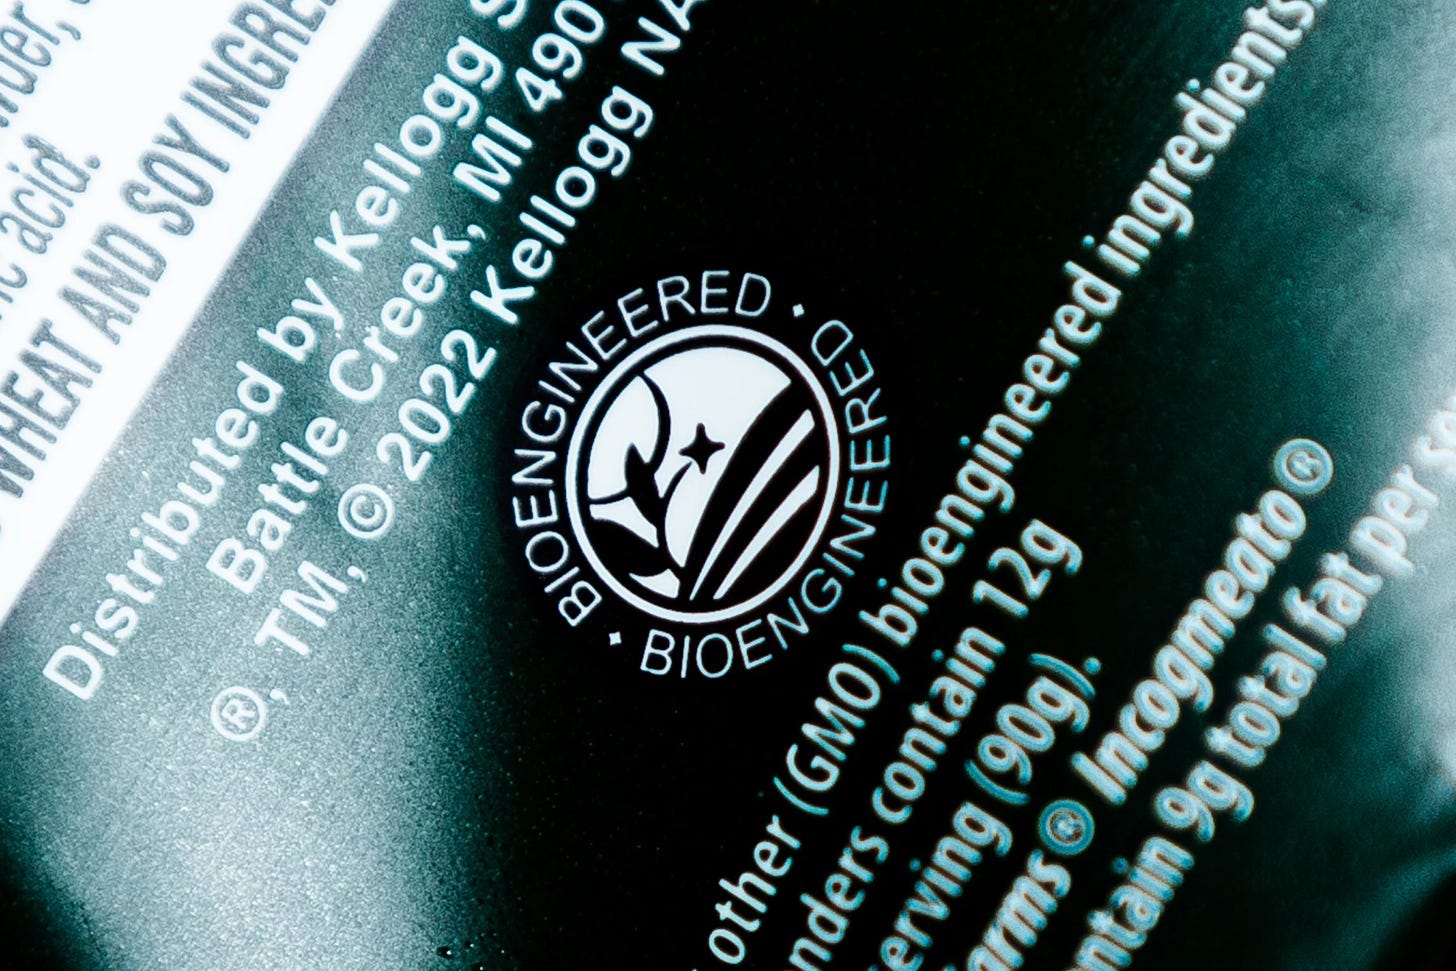 An up-close picture of a food label signifying a "Bioengineered" product.